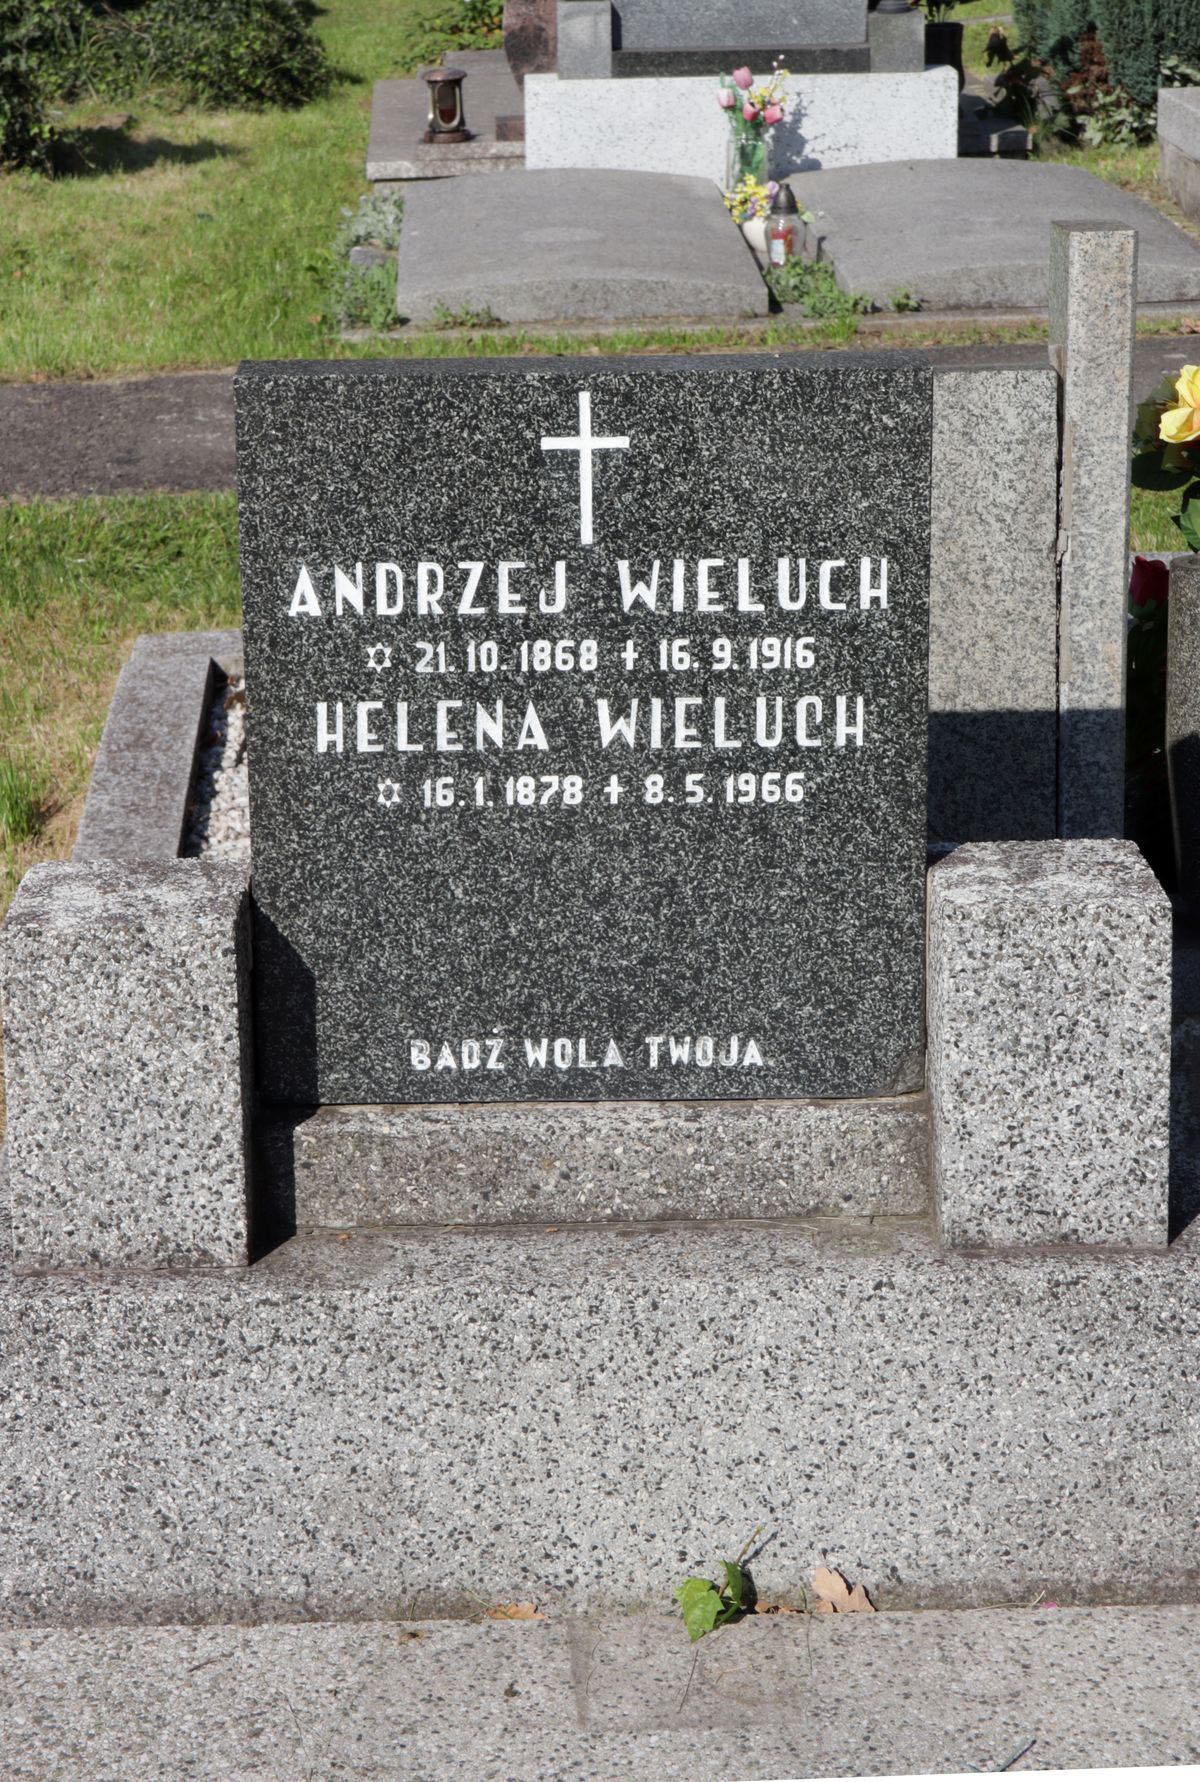 Tombstone of Andrzej and Helena Wieluch, Sibitsa cemetery